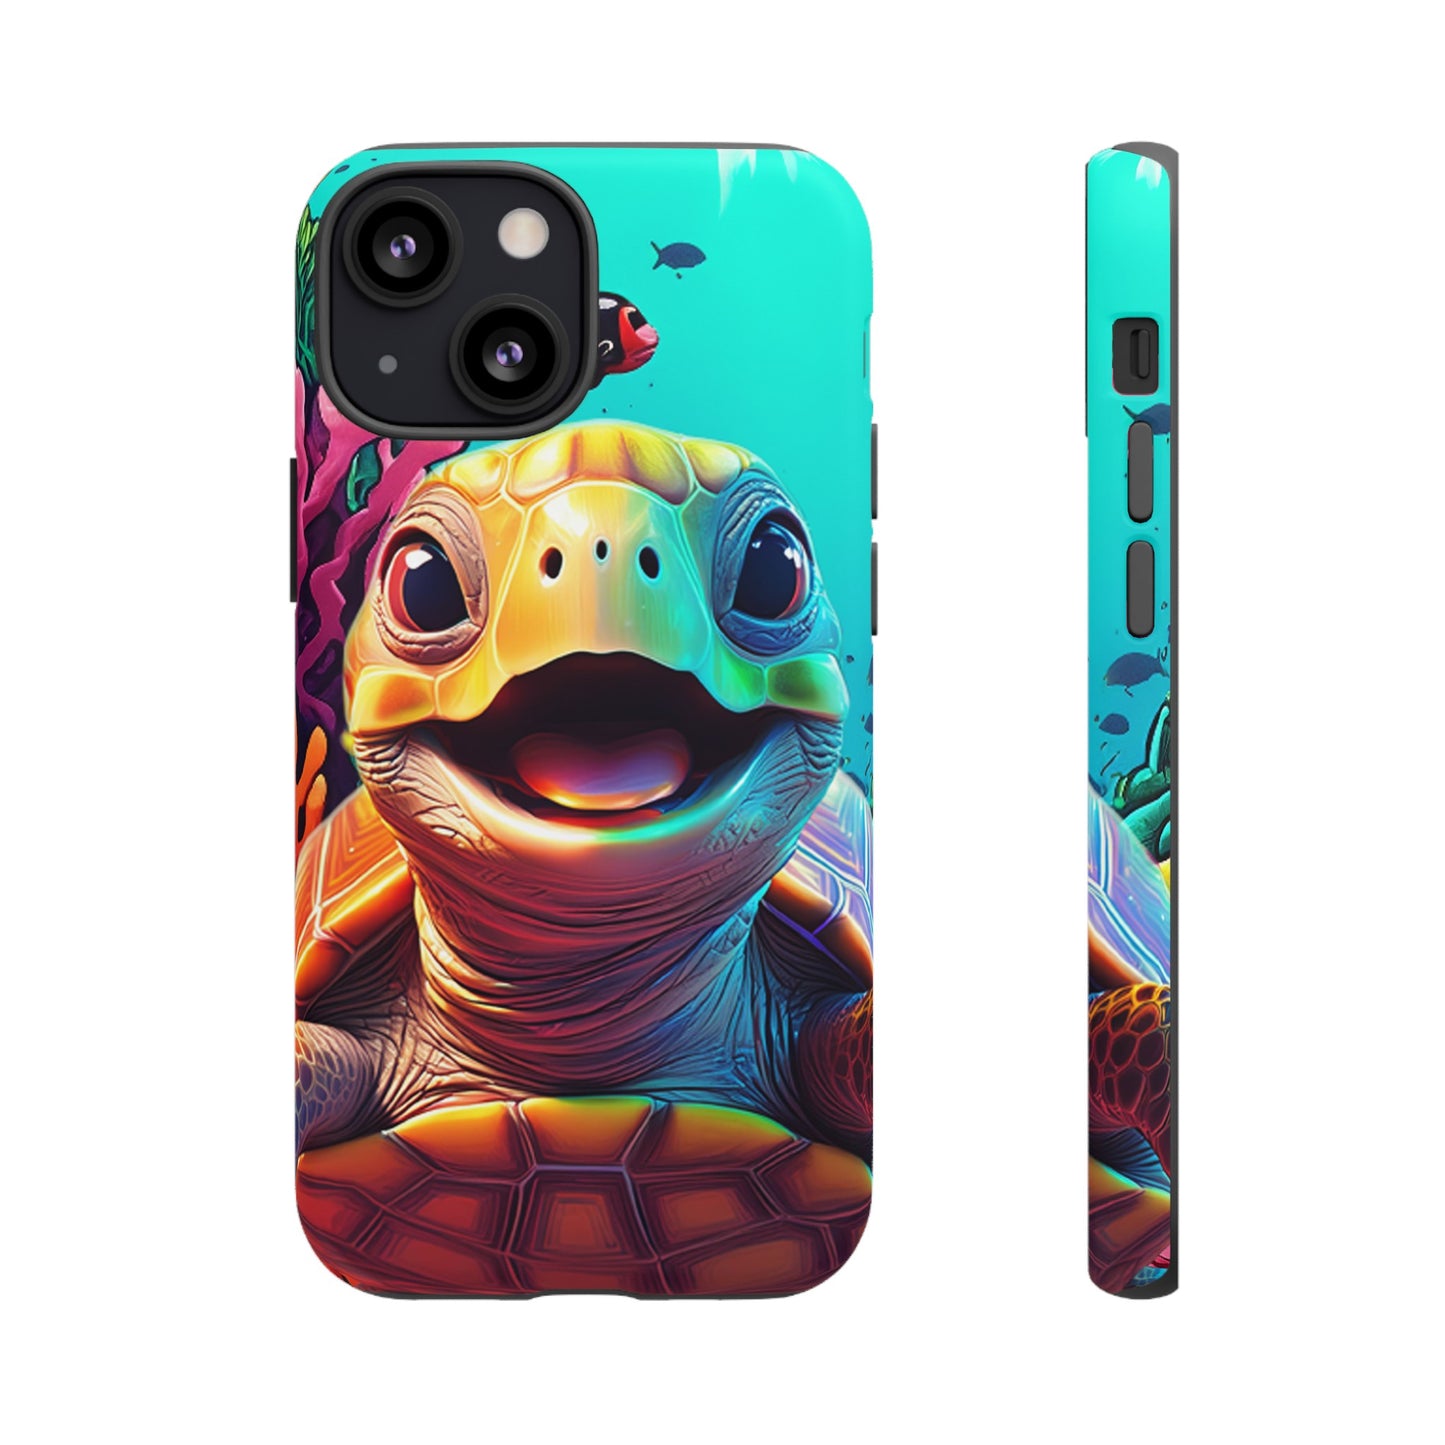 Cheerful Turtle Phone Case for Iphone